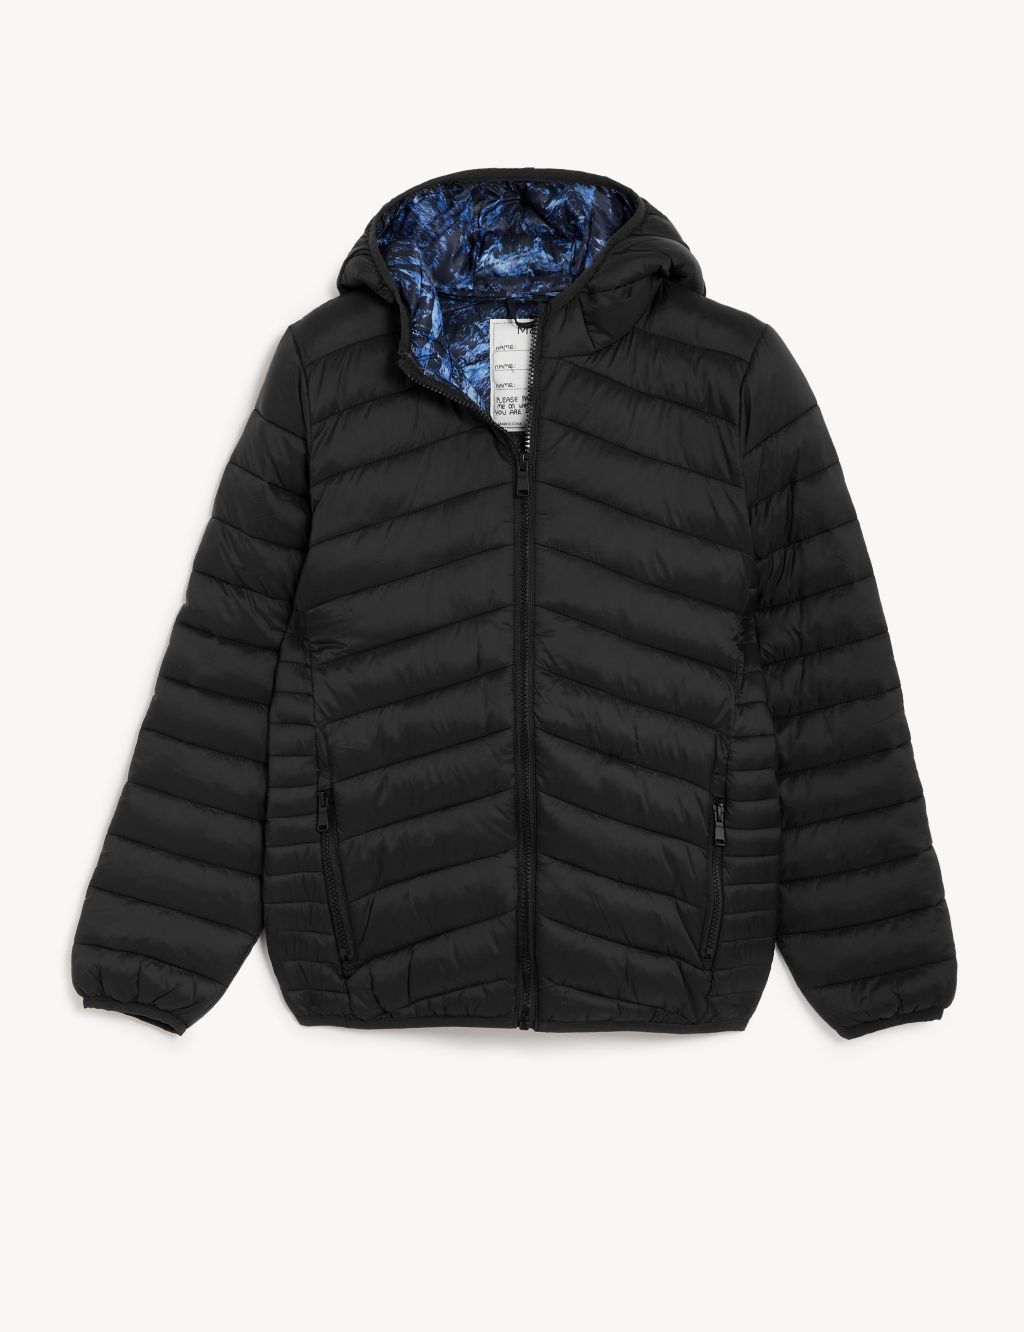 Stormwear™ Lightweight Padded Jacket (6-16 Yrs) | M&S Collection | M&S